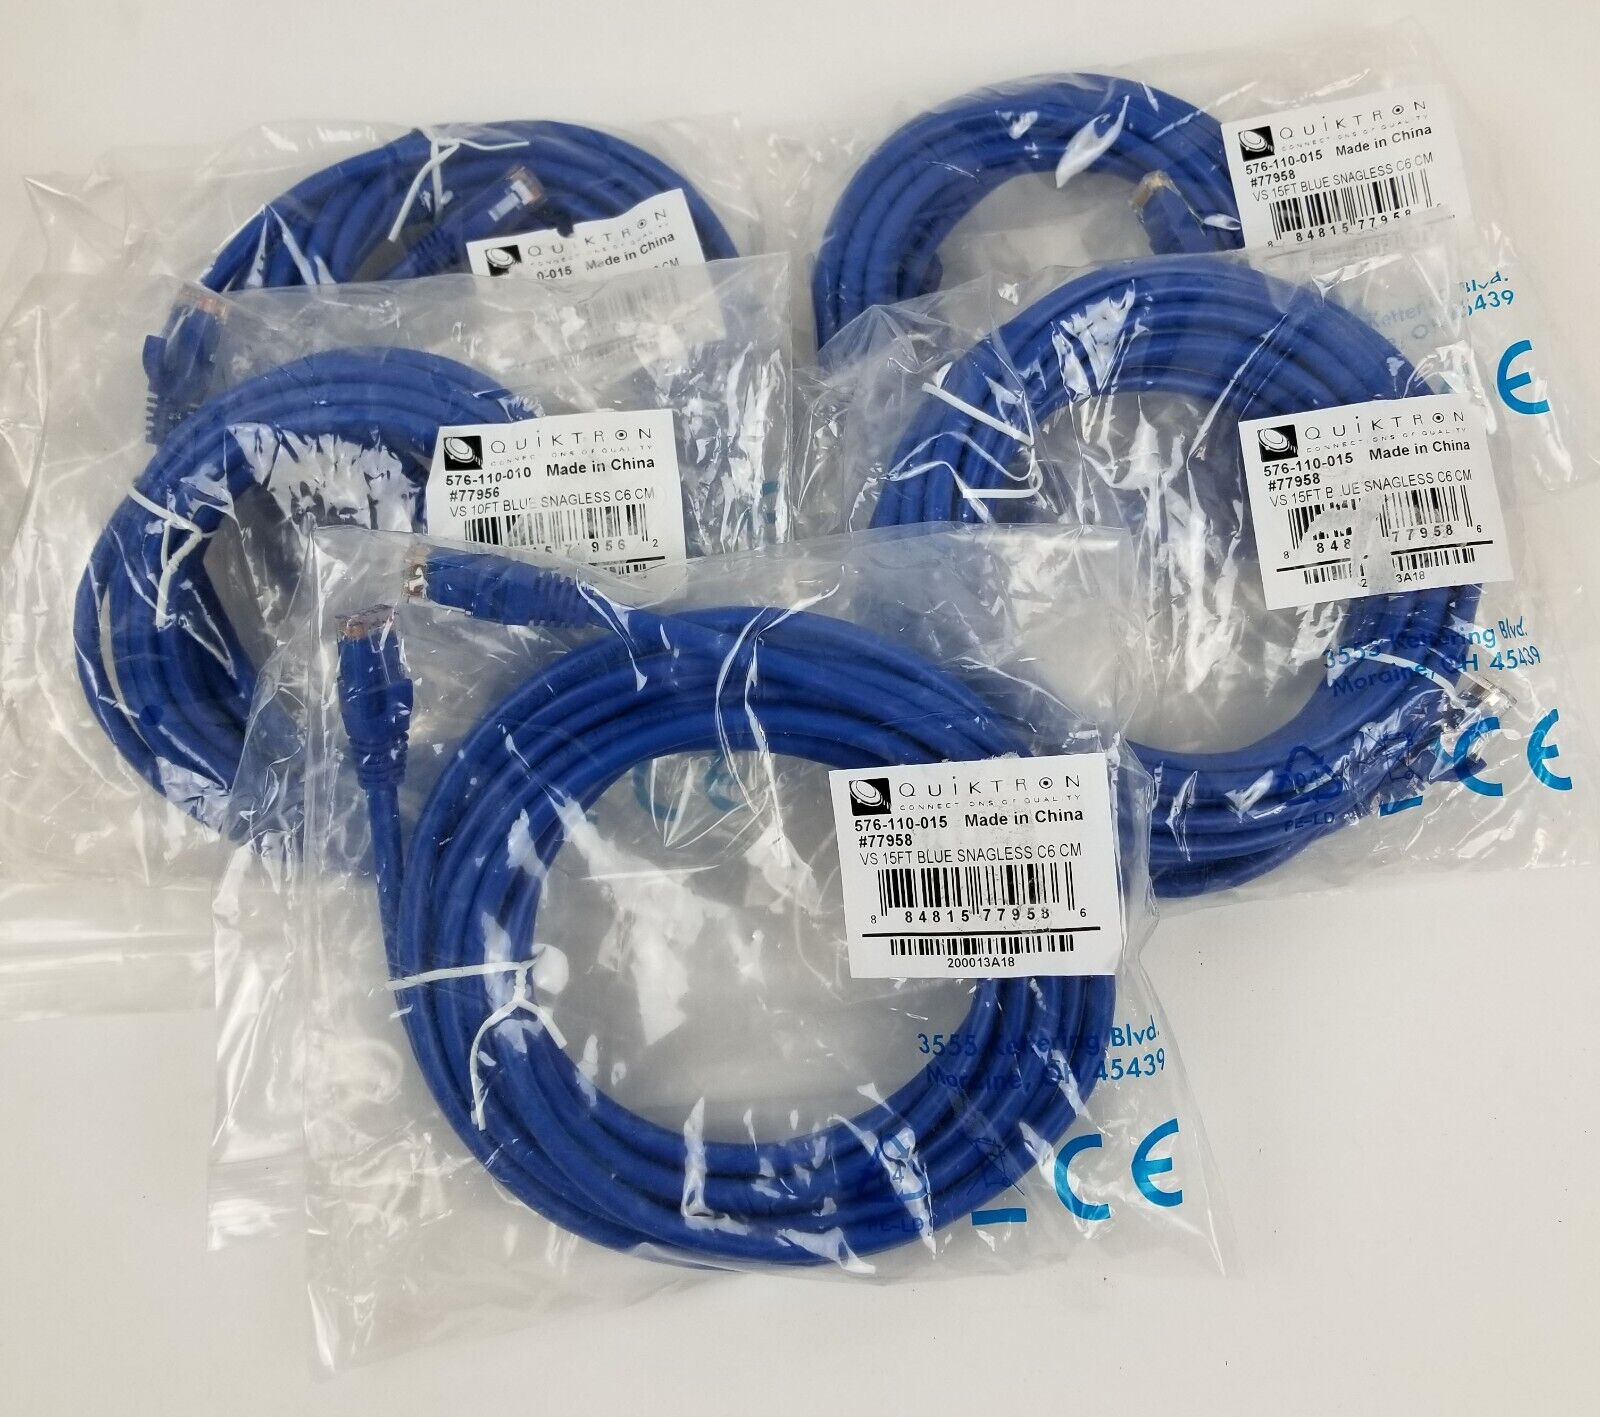 5 Category 6 576-110-015 RJ45 Ethernet Patch Cord Booted 15ft Snagless Quiktron